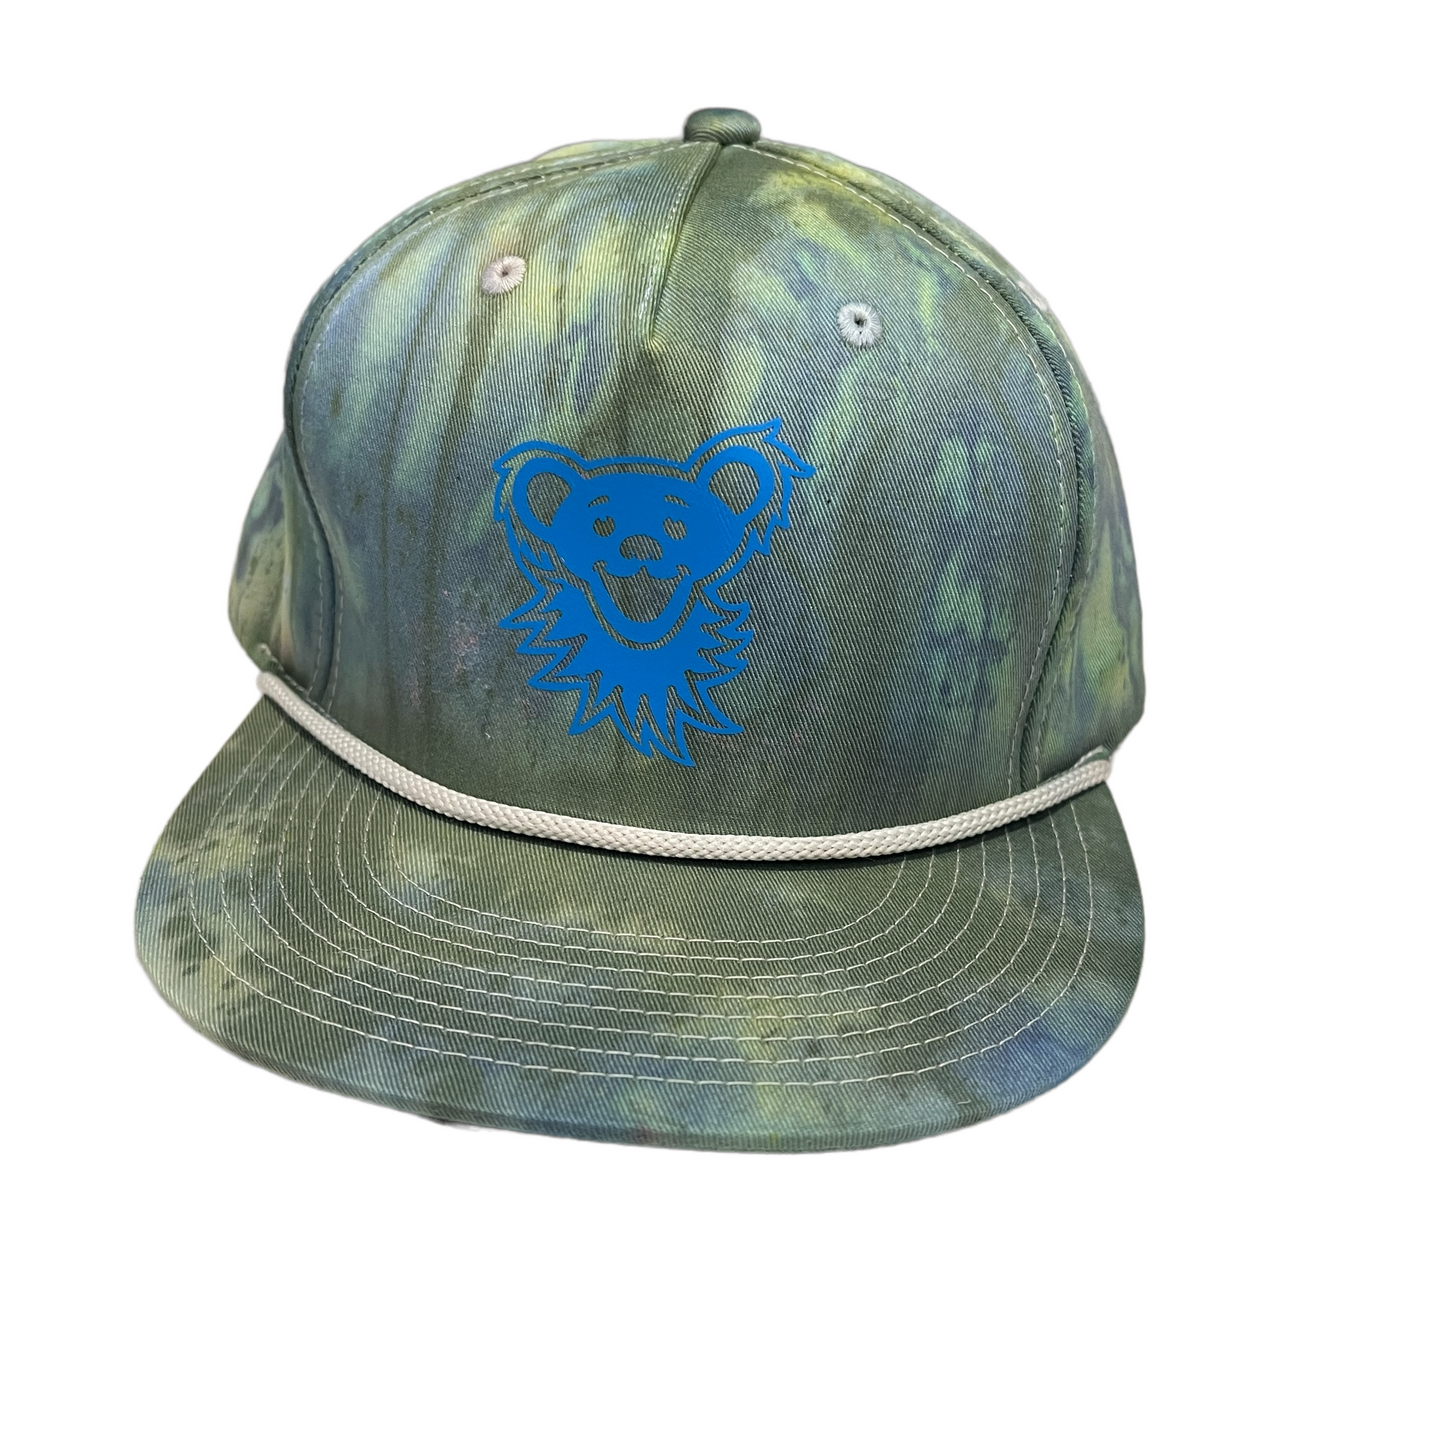 Hand dyed hat - Bear